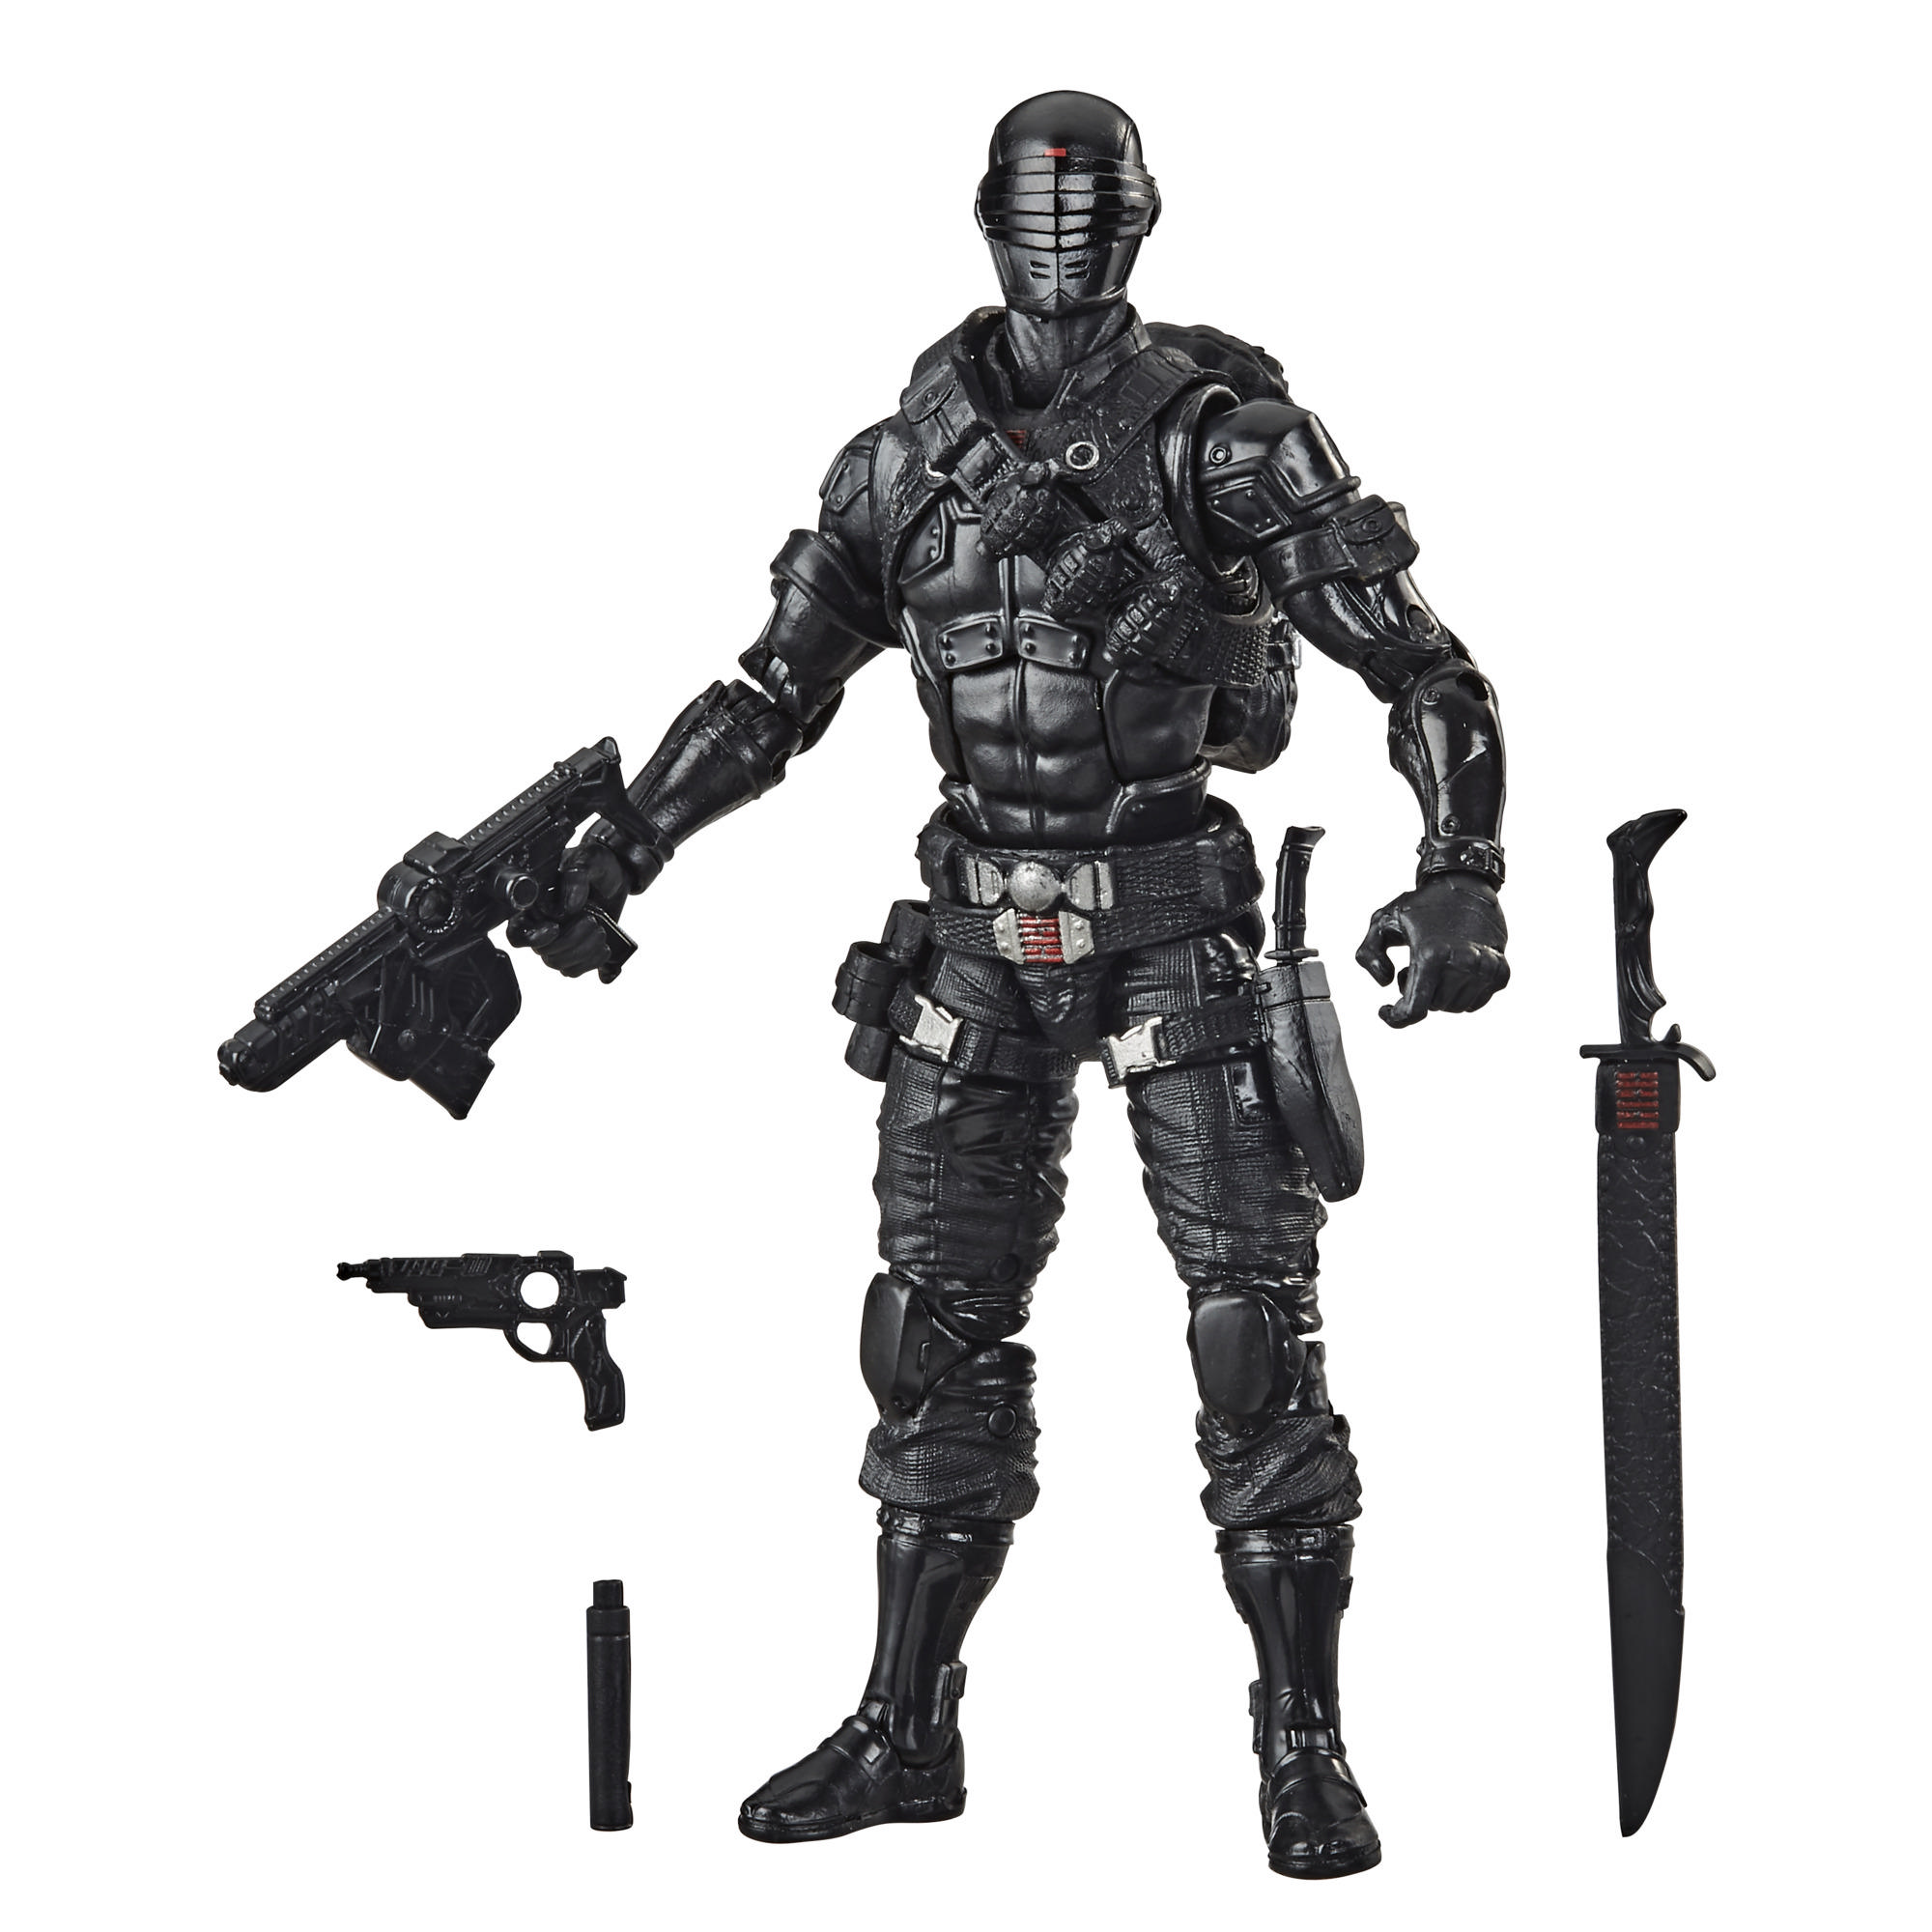 GI Joe|G.I. Joe Classified Series Snake Eyes Action Figure 02 Collectible  Toy with Multiple Accessories